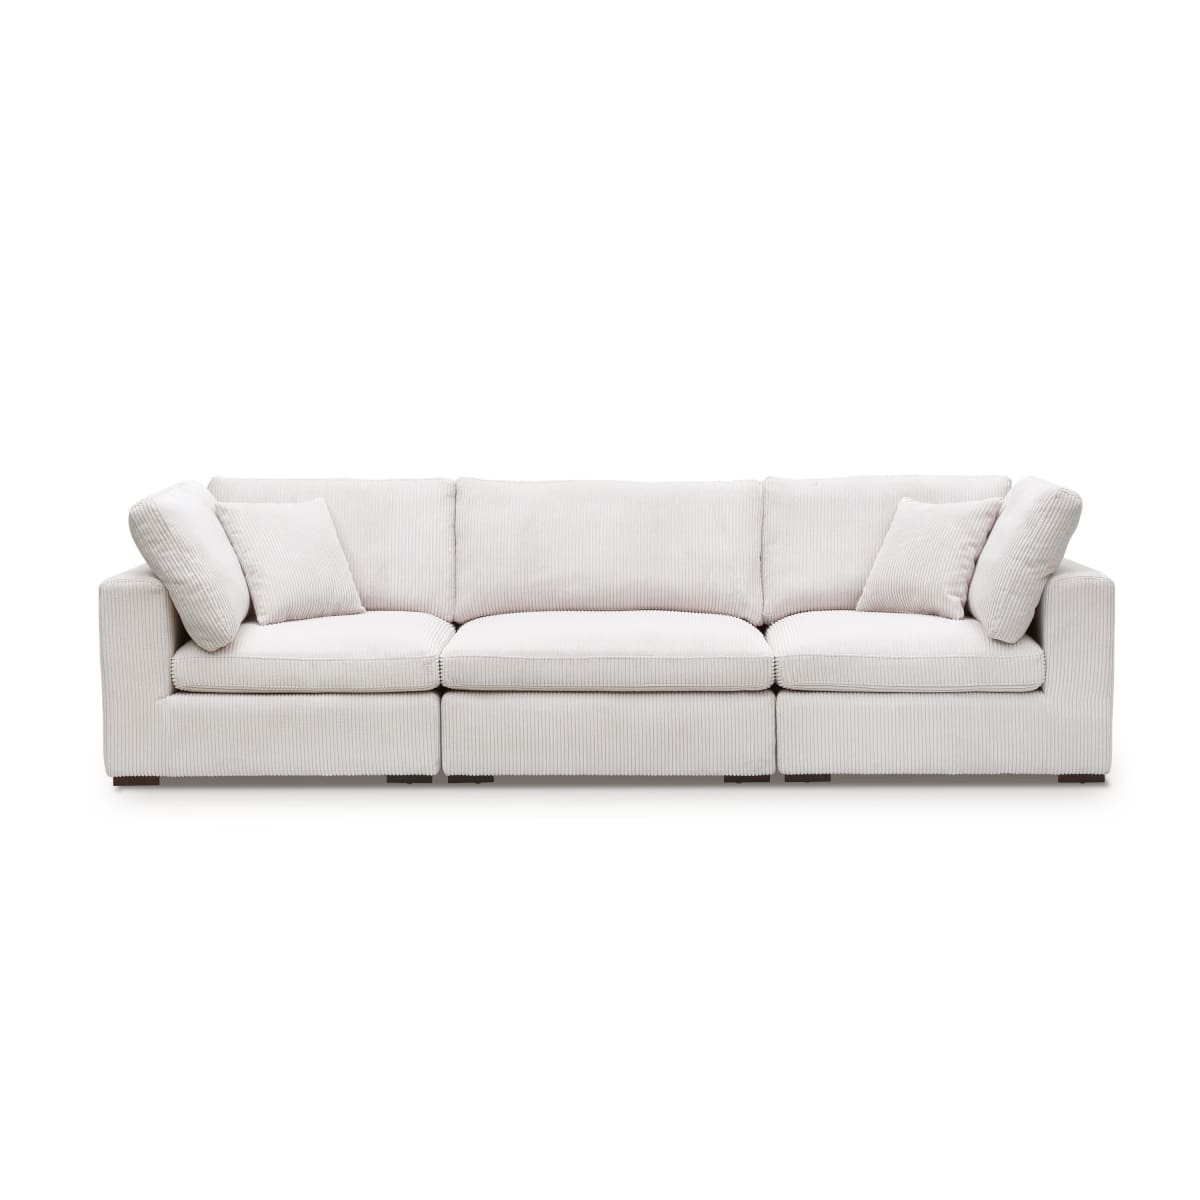 Claire 5pc Modular Sectional - Sectional